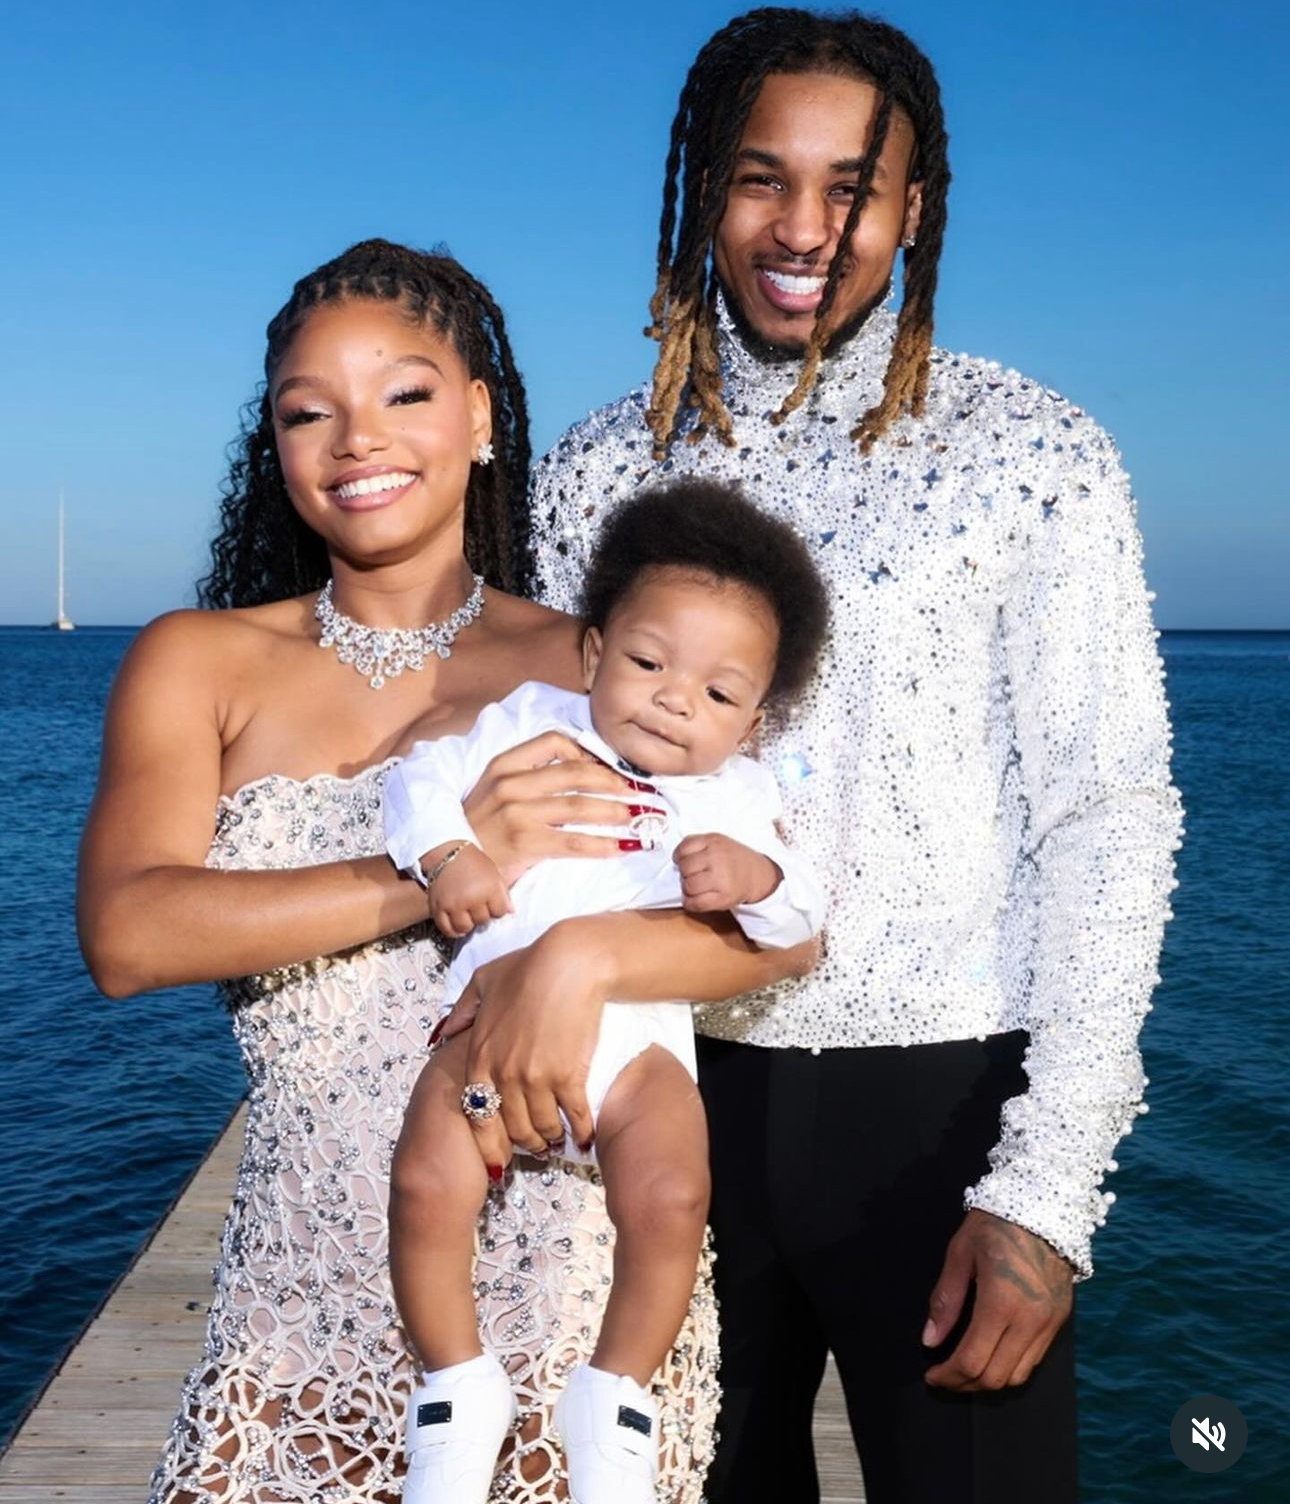 Bailey's adorable family photos: halle bailey and ddg holding baby halo during their picturesque vacation in italy